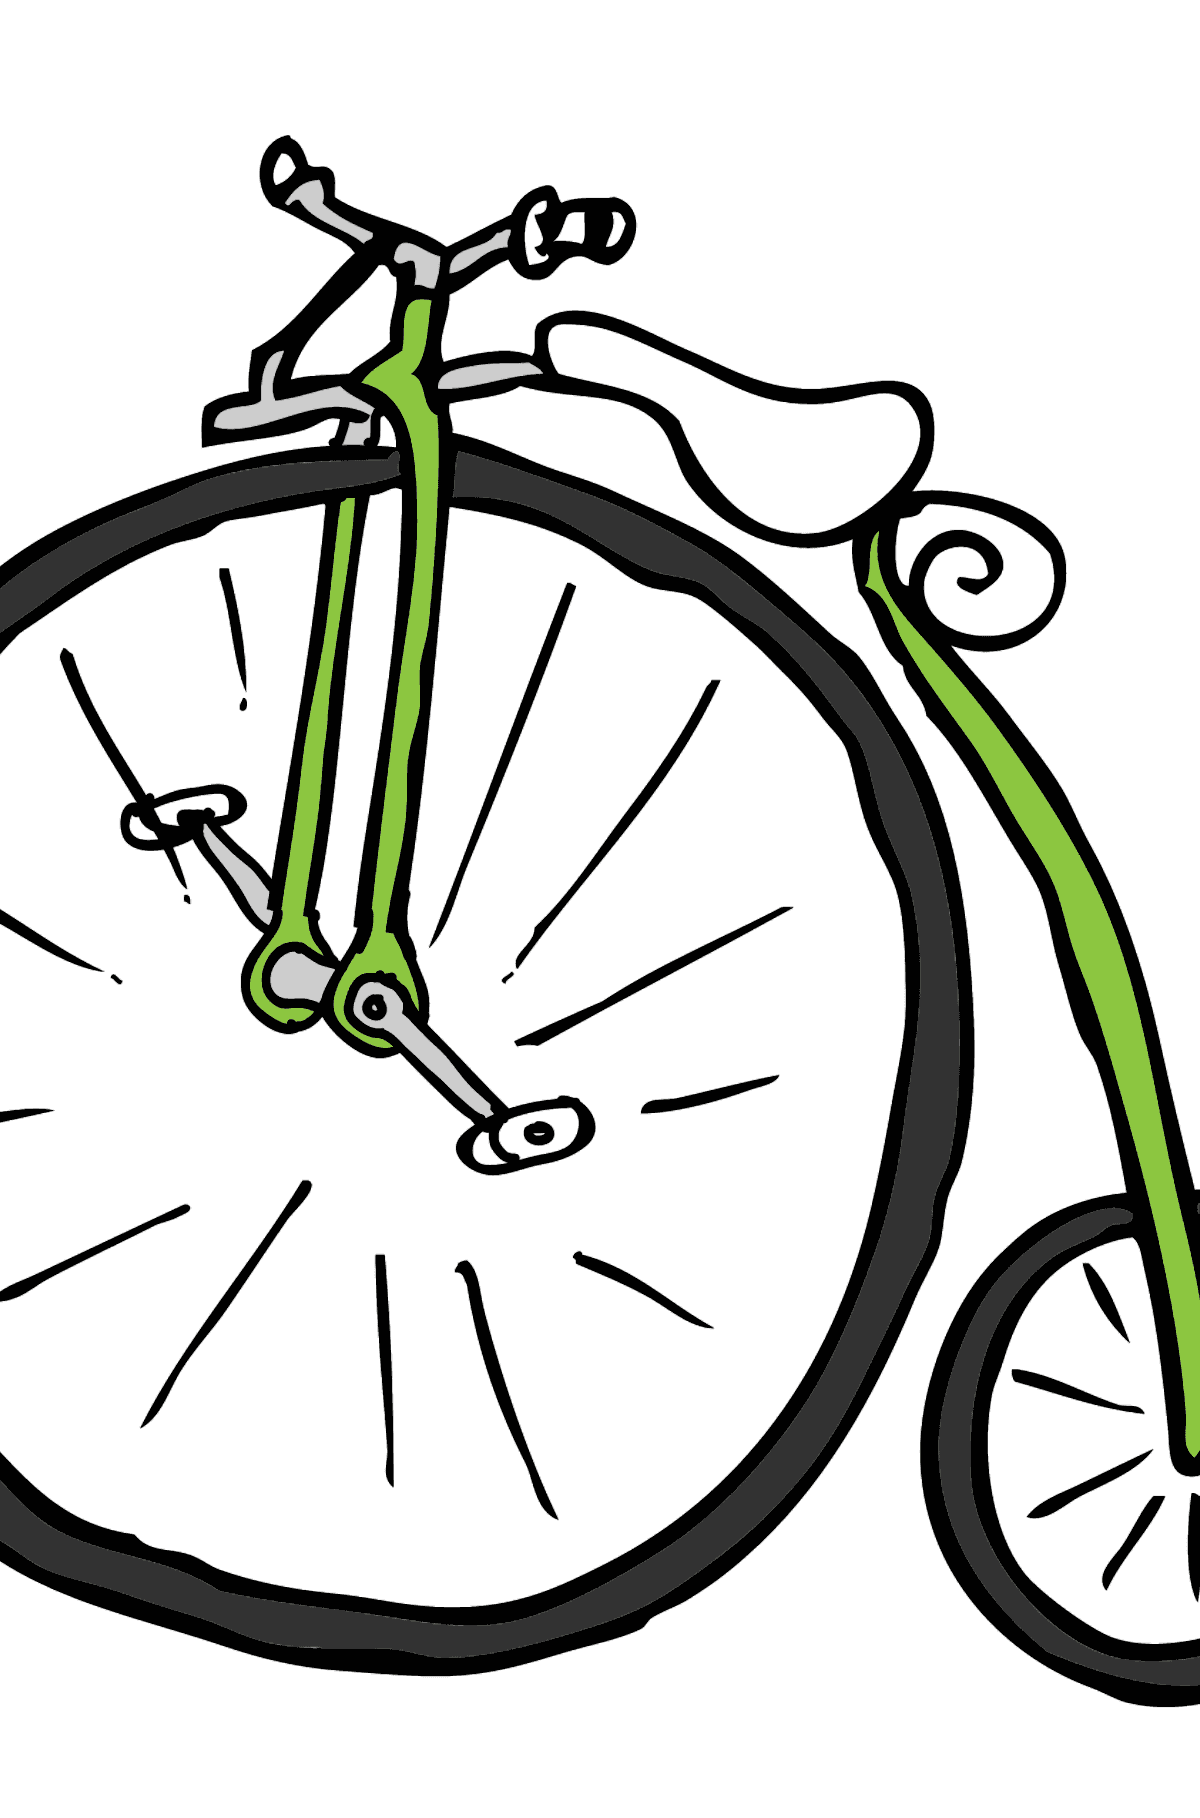 Coloring Page - A High-Wheel Cycle – Unicycle - Coloring Pages for Kids